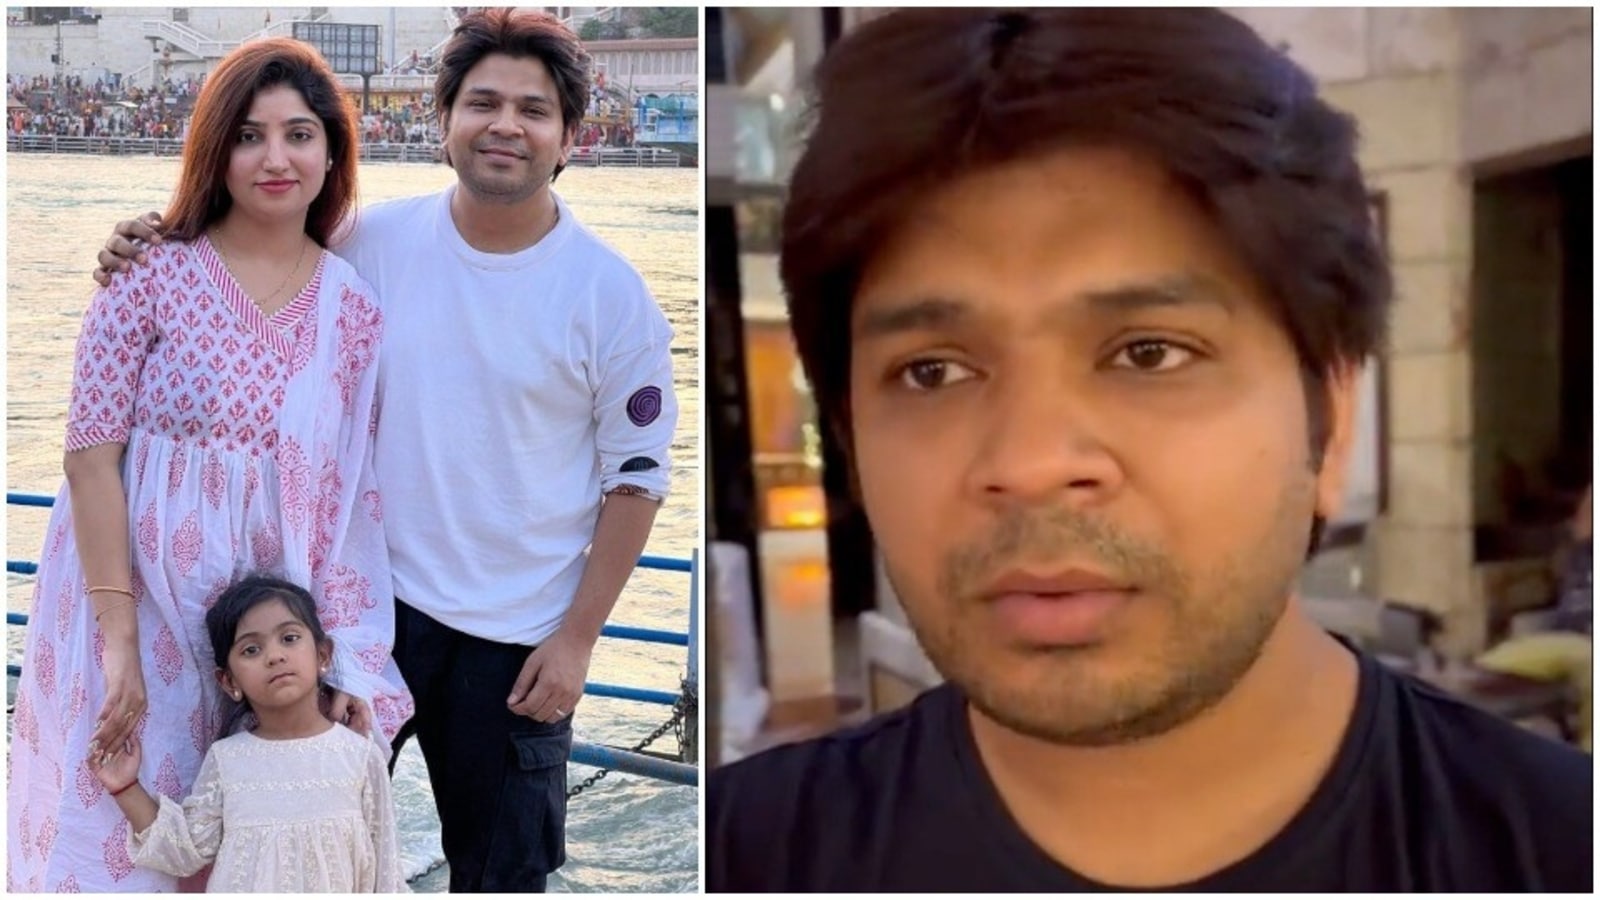 Indian Chhote Bachche Xxx - Singer Ankit Tiwari posts video from luxury hotel as daughter 'sleeps  hungry' - Hindustan Times